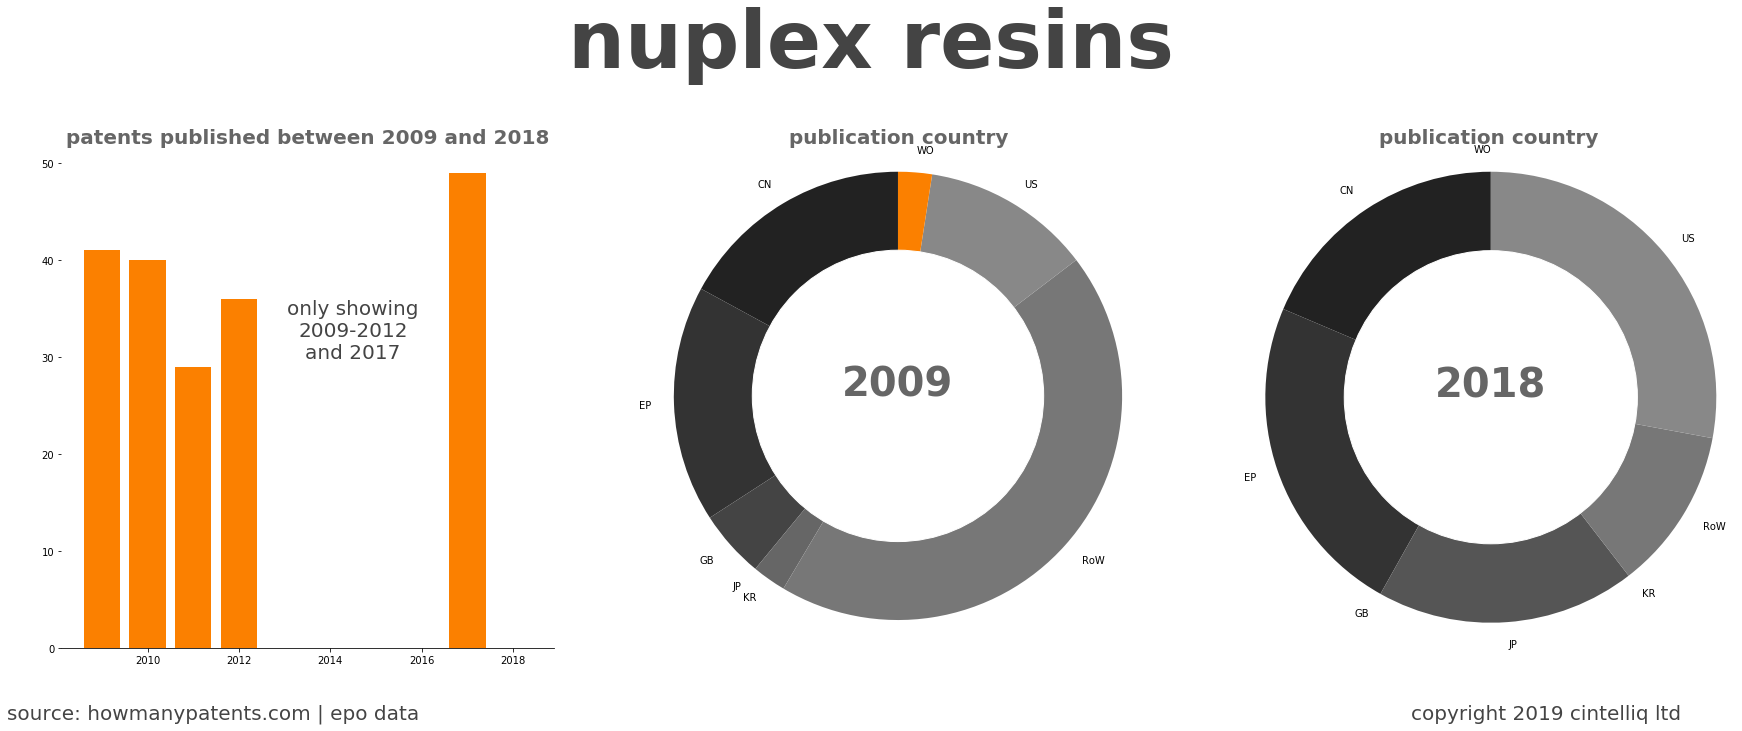 summary of patents for Nuplex Resins